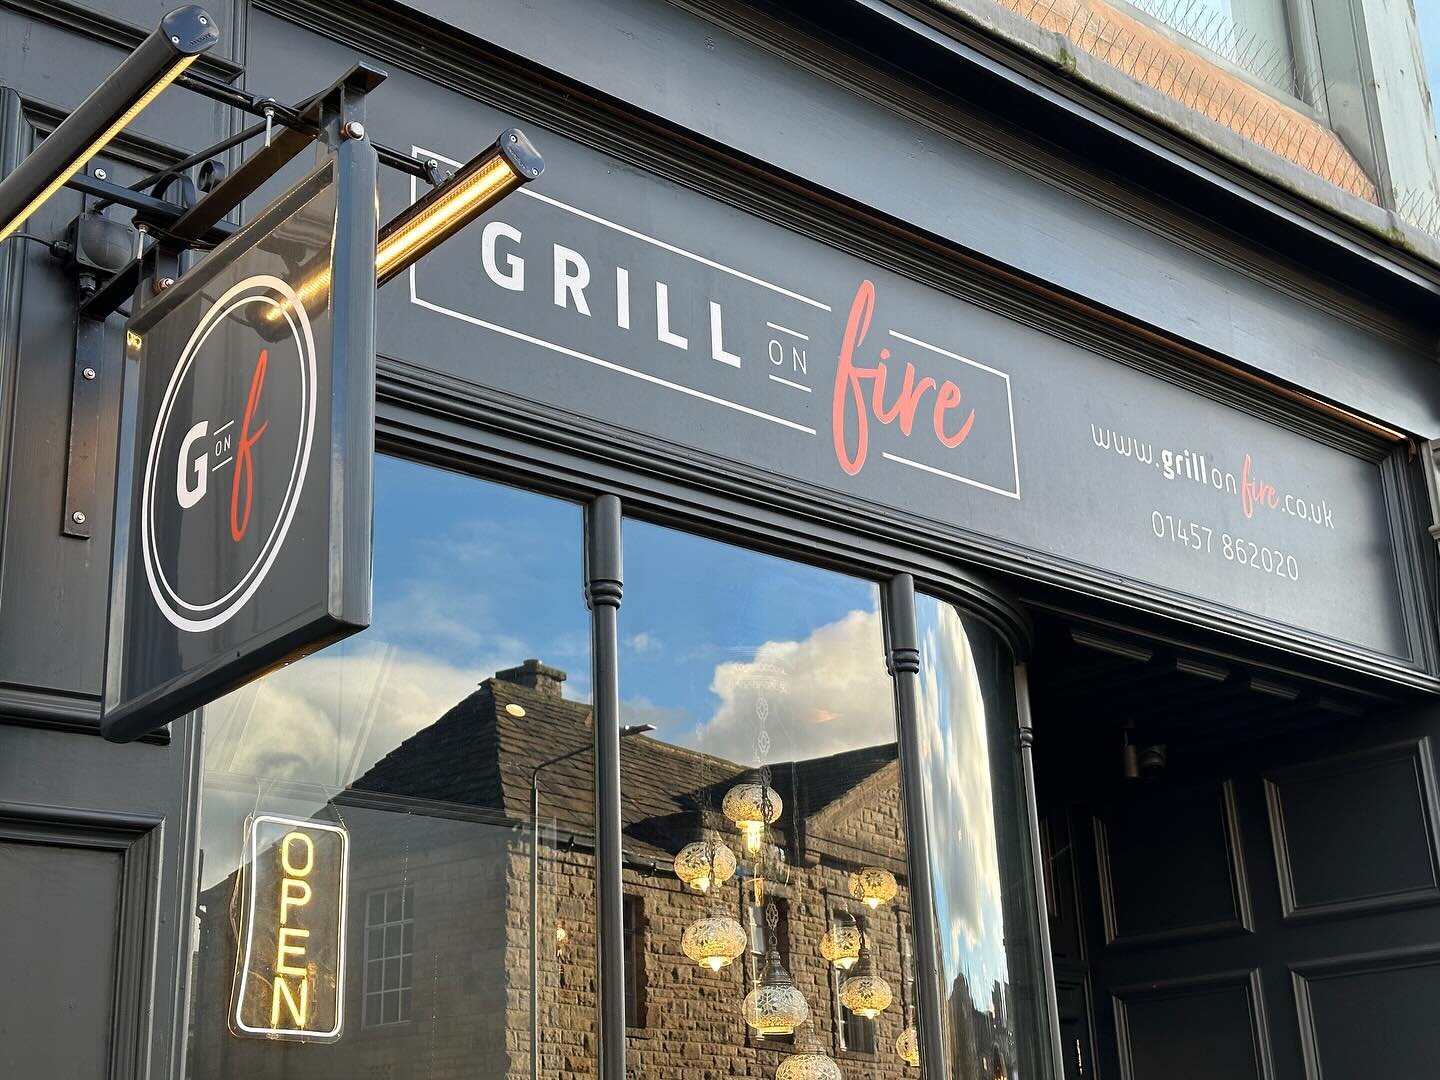 Grill on Fire 🔥 #Glossop

We manufactured and installed the signage for the new @grillonfire_glossop 

🔥 Timber facia graphics
🔥 LED projecting sign
🔥 Window graphics 
🔥 Feather flag 

#signs #signage #illuminatedsign #highpeakbusiness